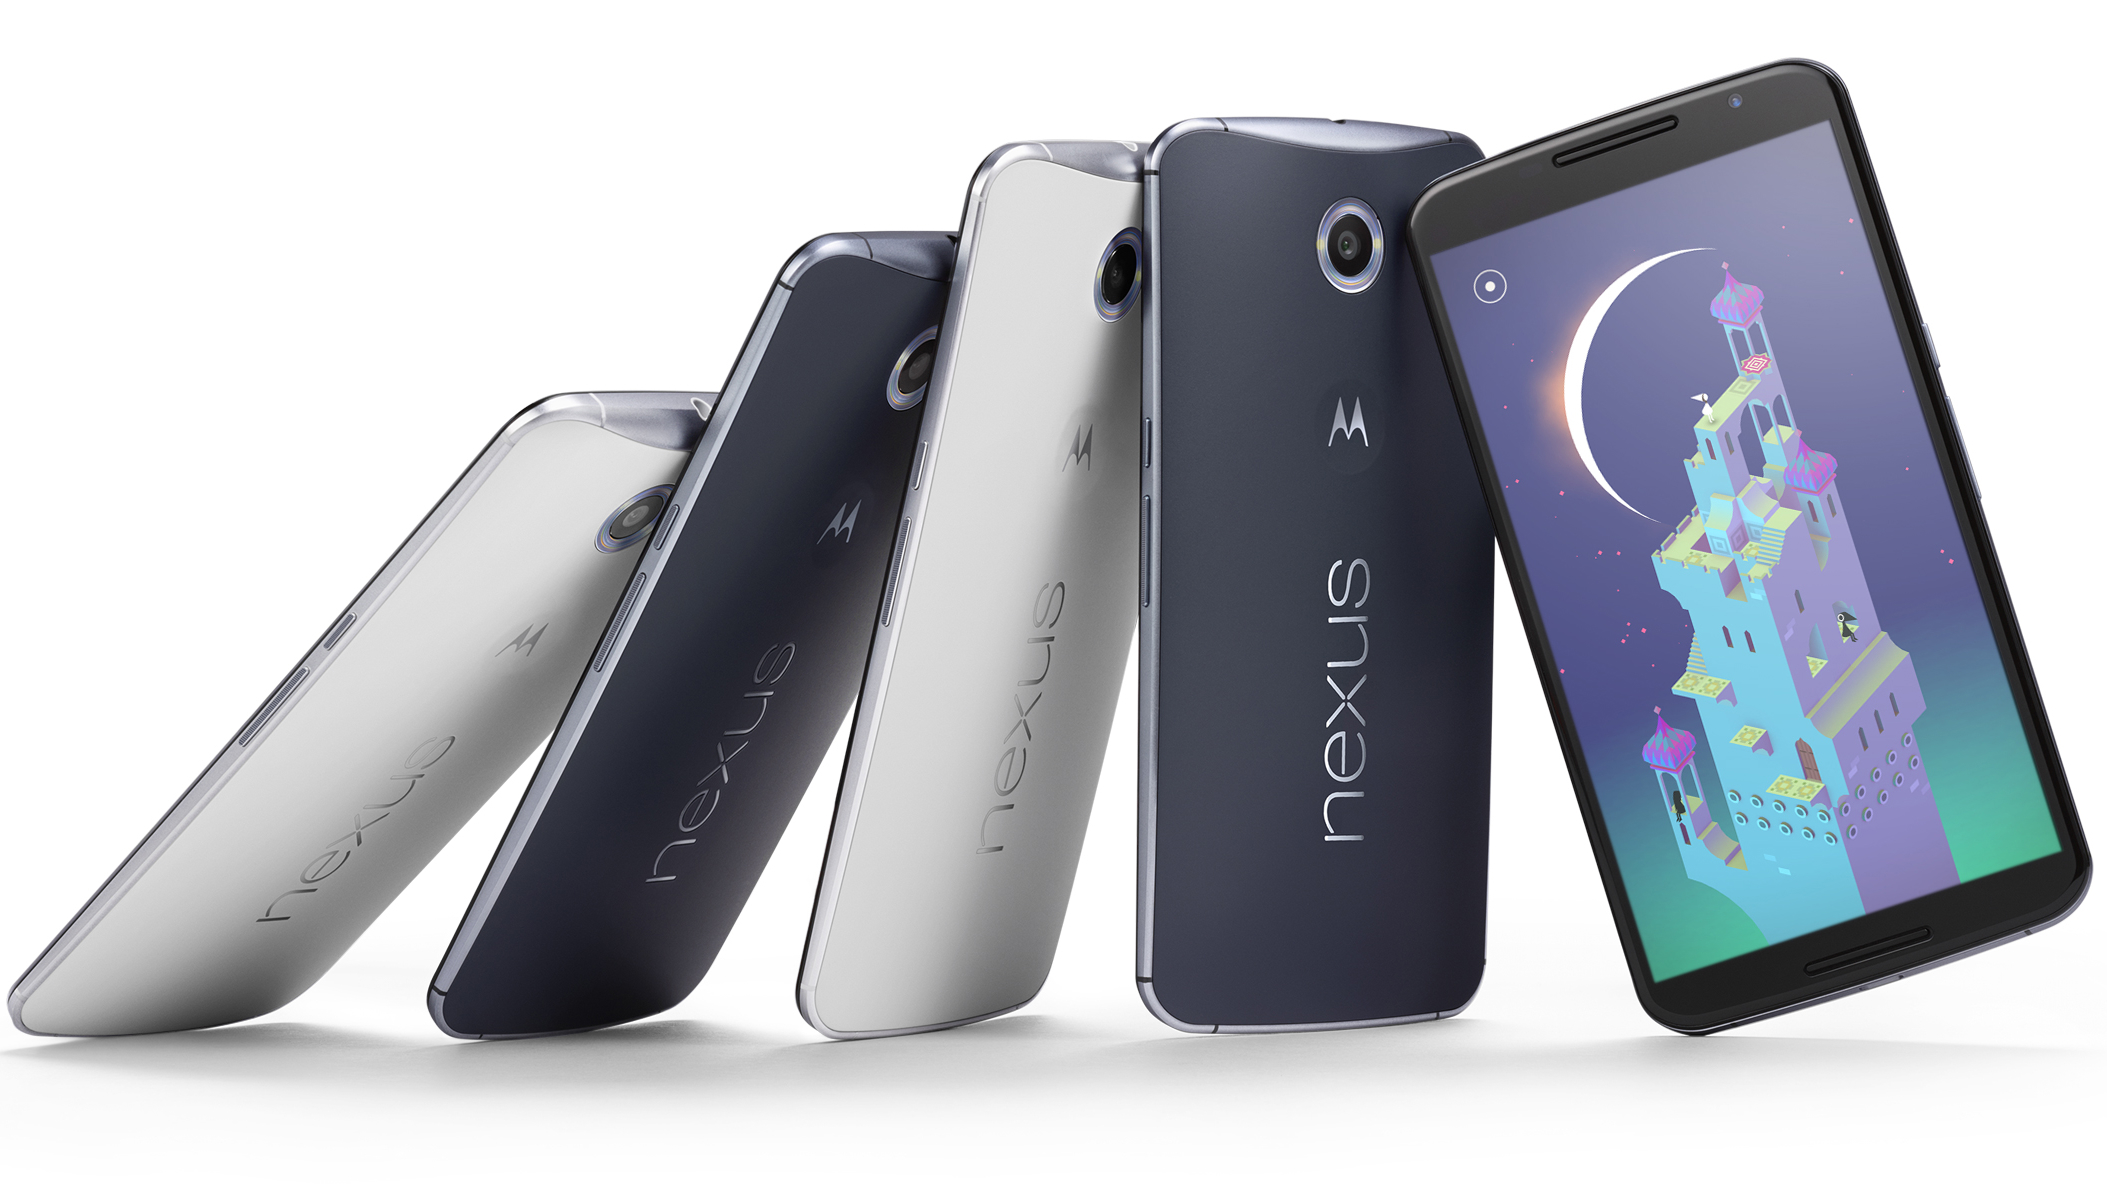 Based on the Moto X, the Nexus 6 set itself apart with a larger design and the first use of Android 5.0 Lollipop